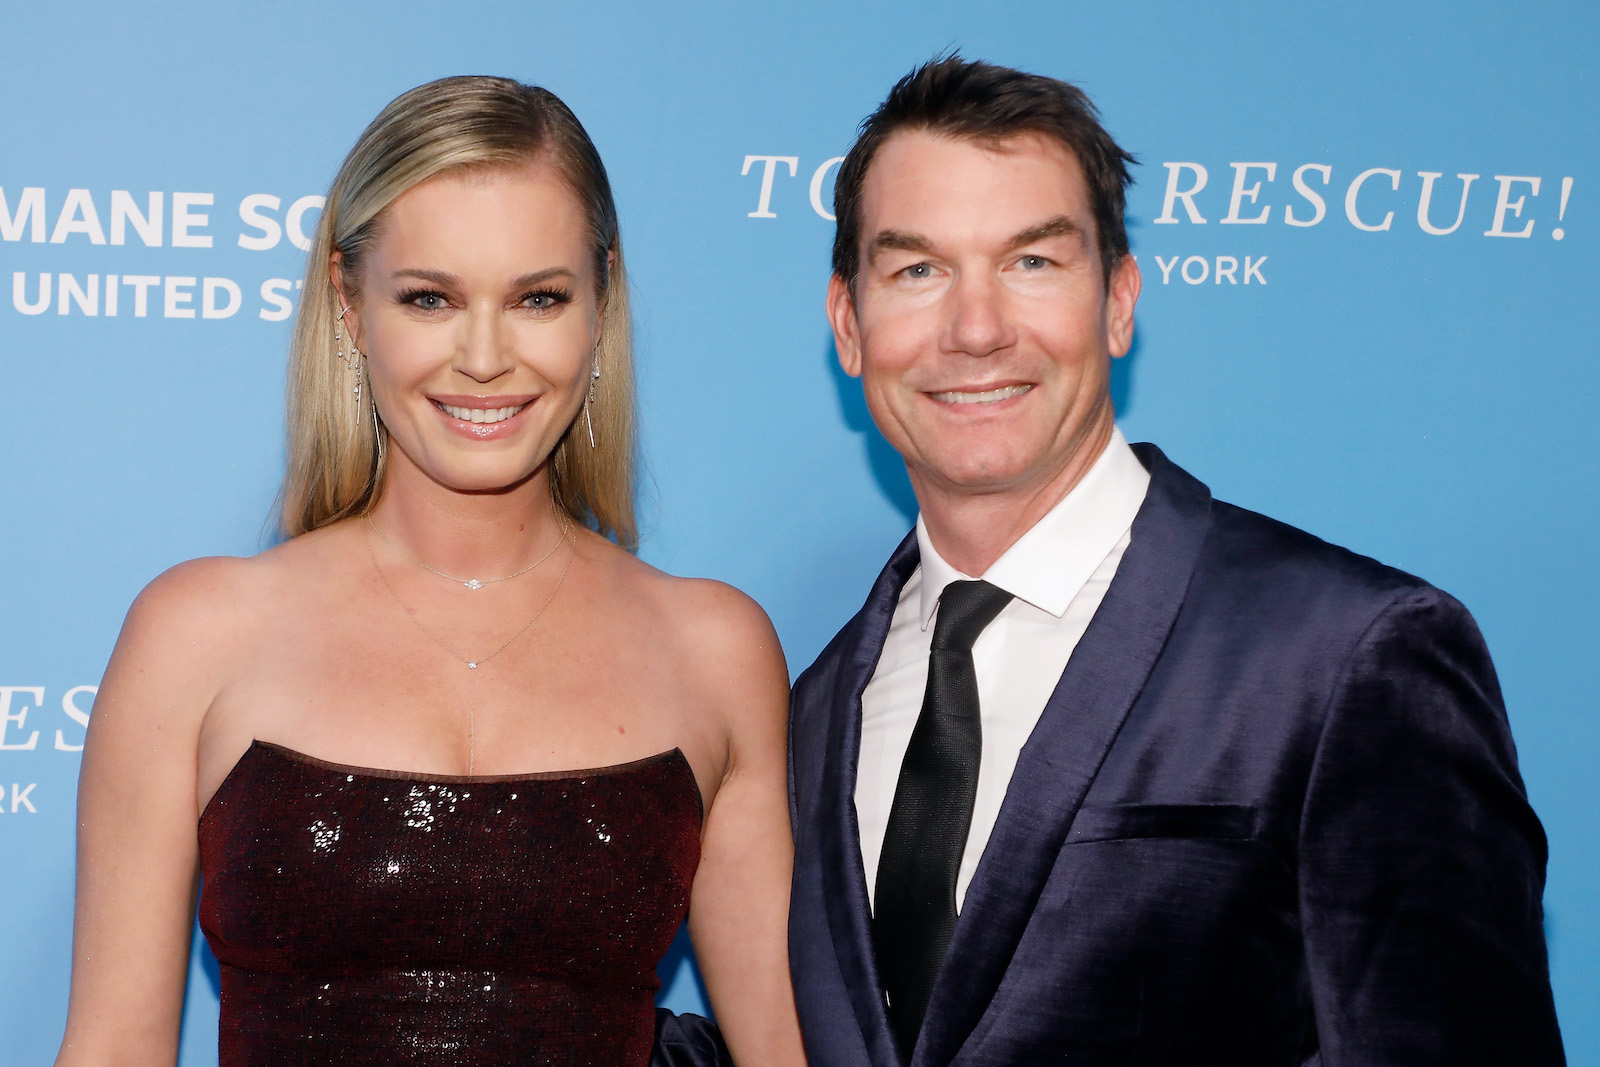 Rebecca Romijn and Jerry O'Connell stop for a photo on the red carpet. Jerry O'Connell recently suggested that his wife joins the cast of 'RHOBH'